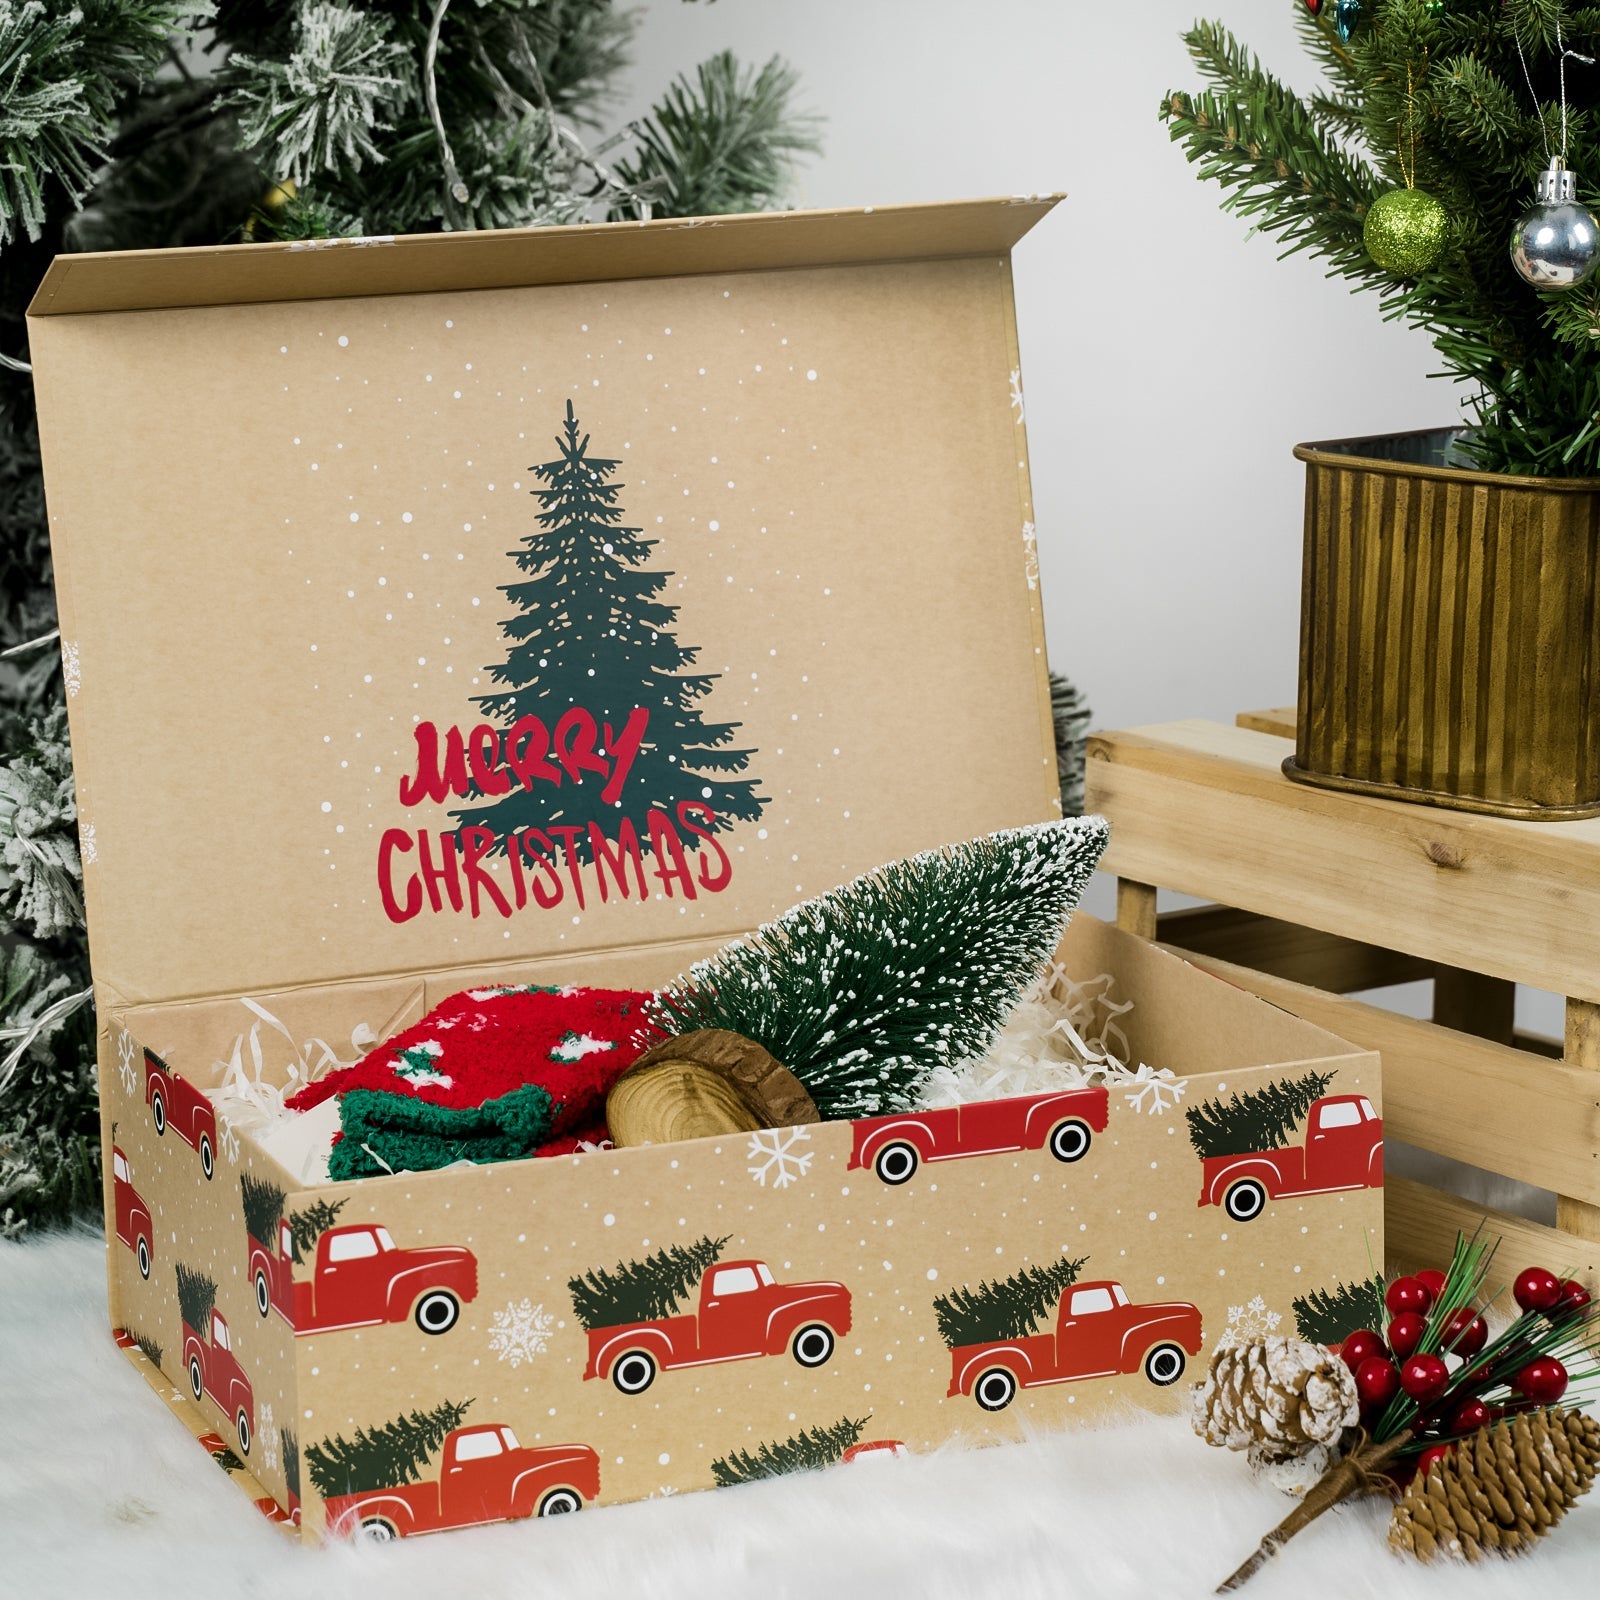 14x9x4.3 inch Collapsible Gift Box with Magnetic Closure - Tree Farm